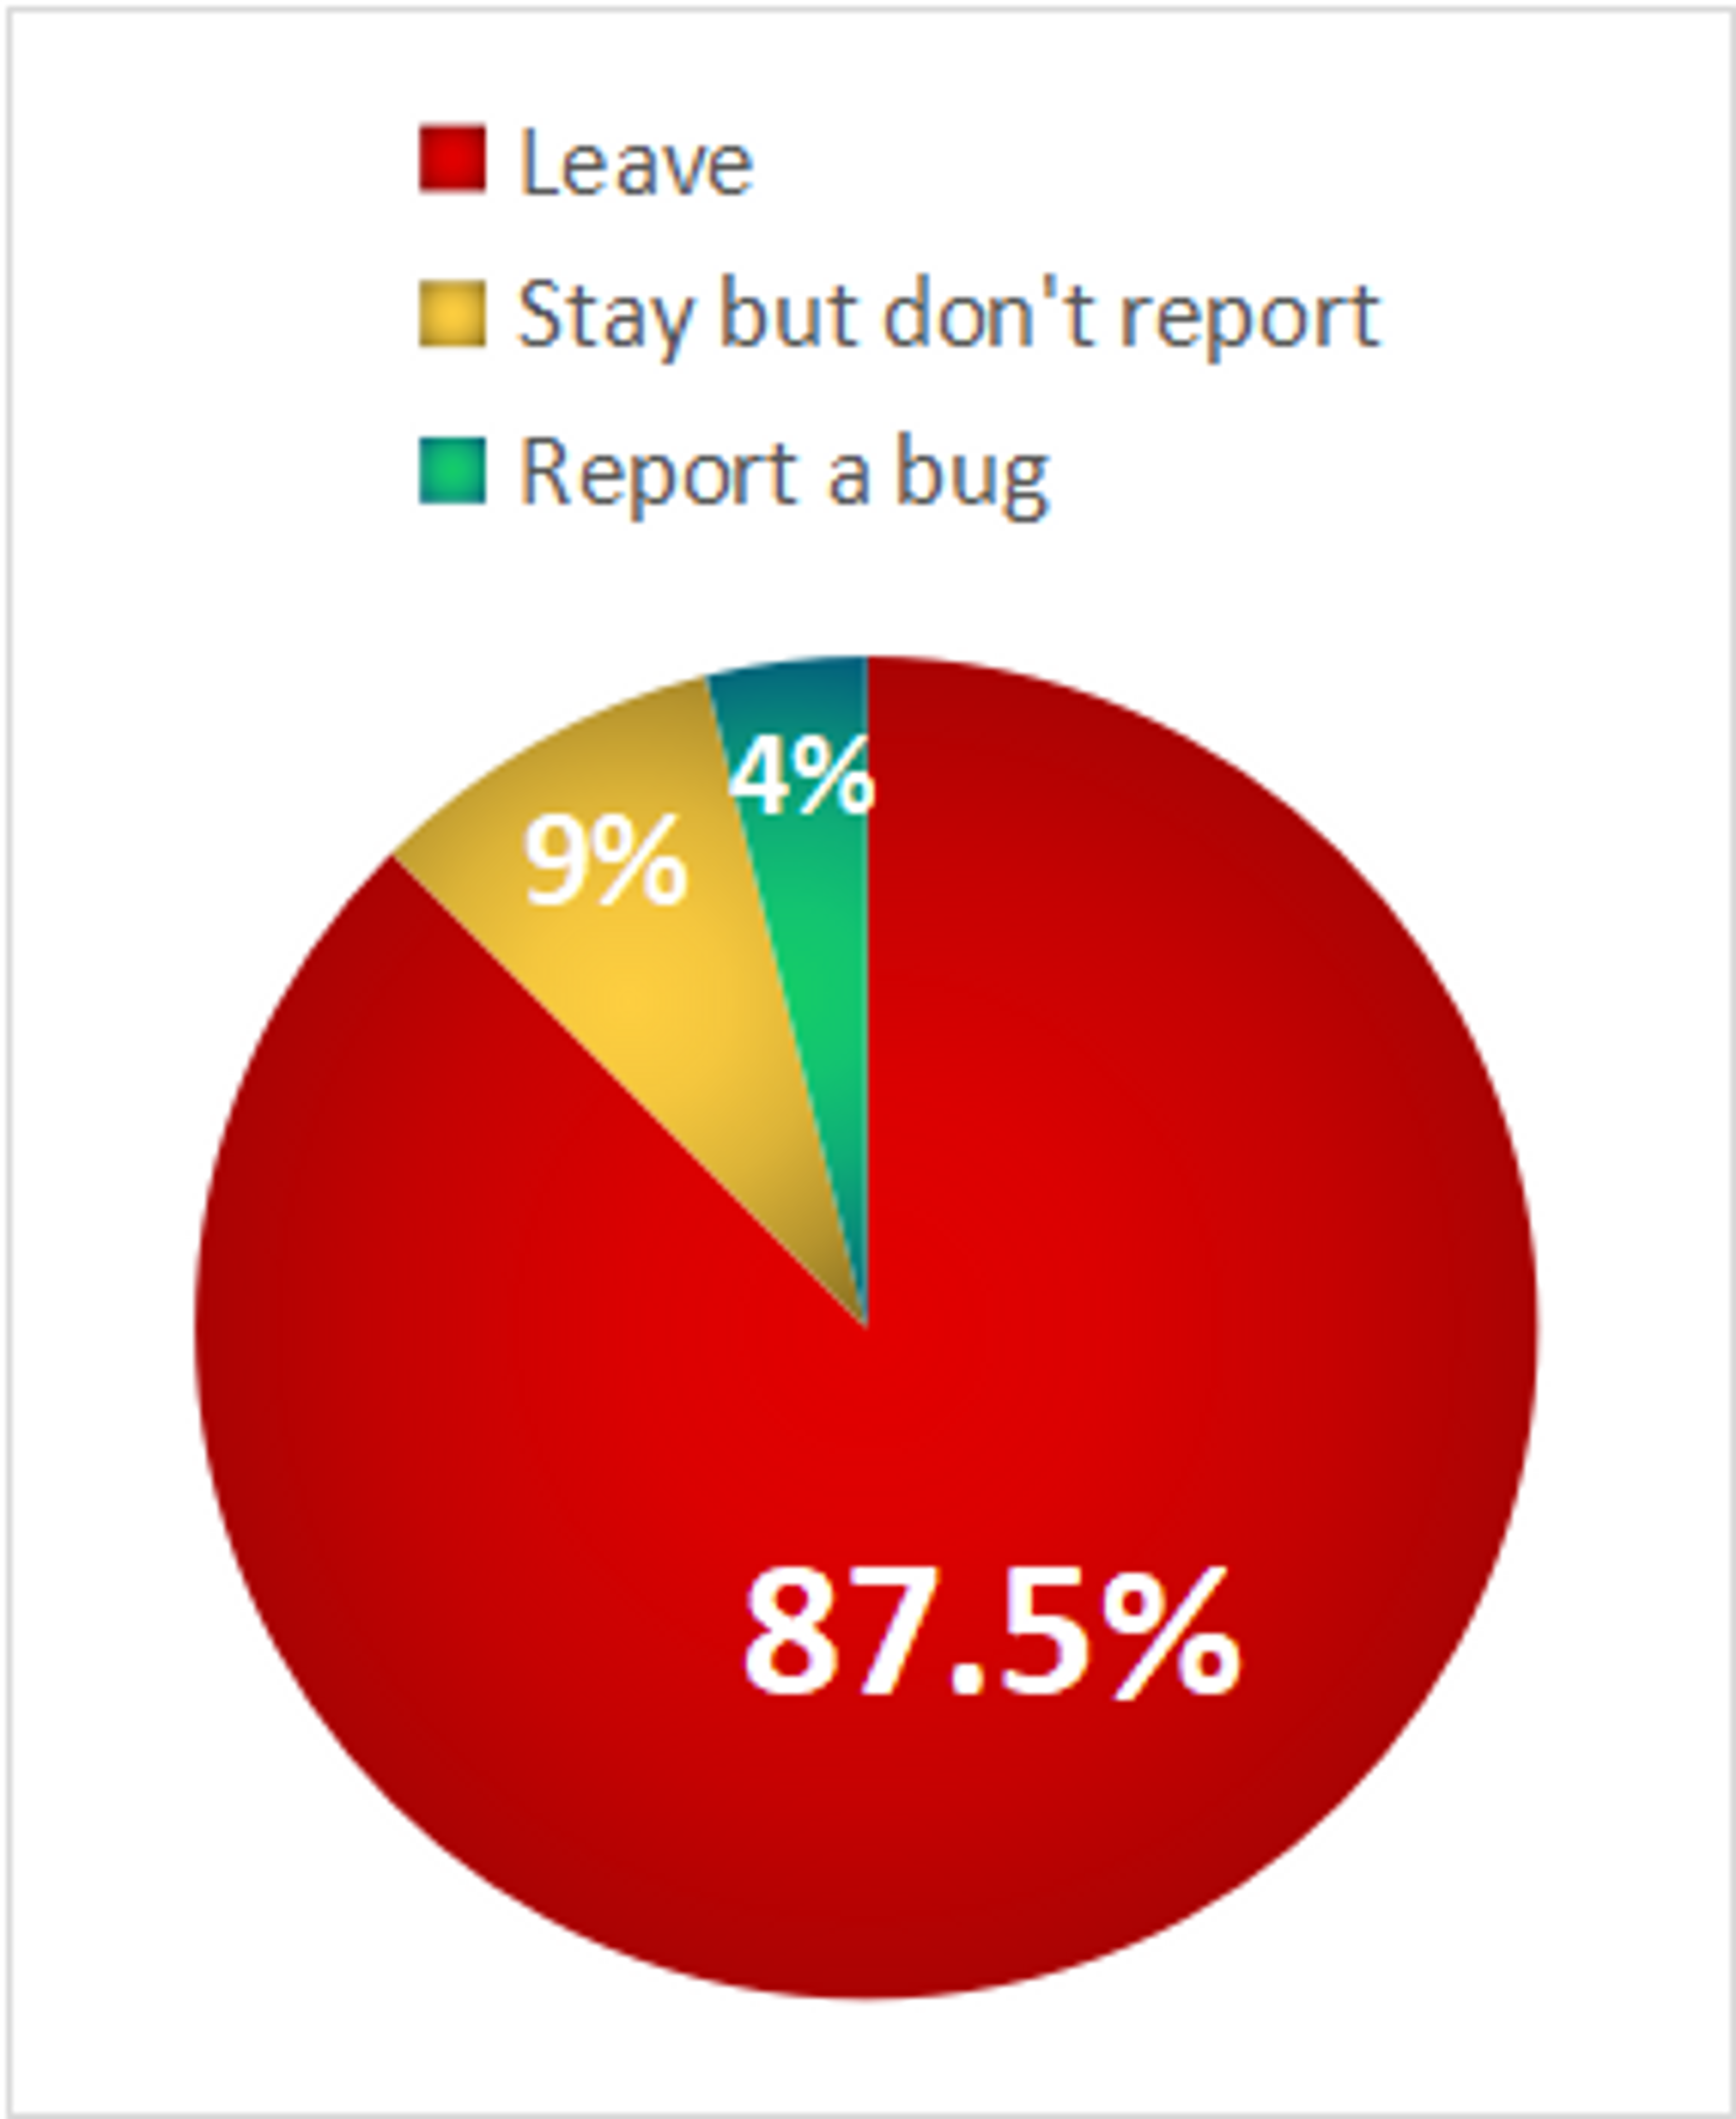 Less than 4% of users that encounter a bug will report it